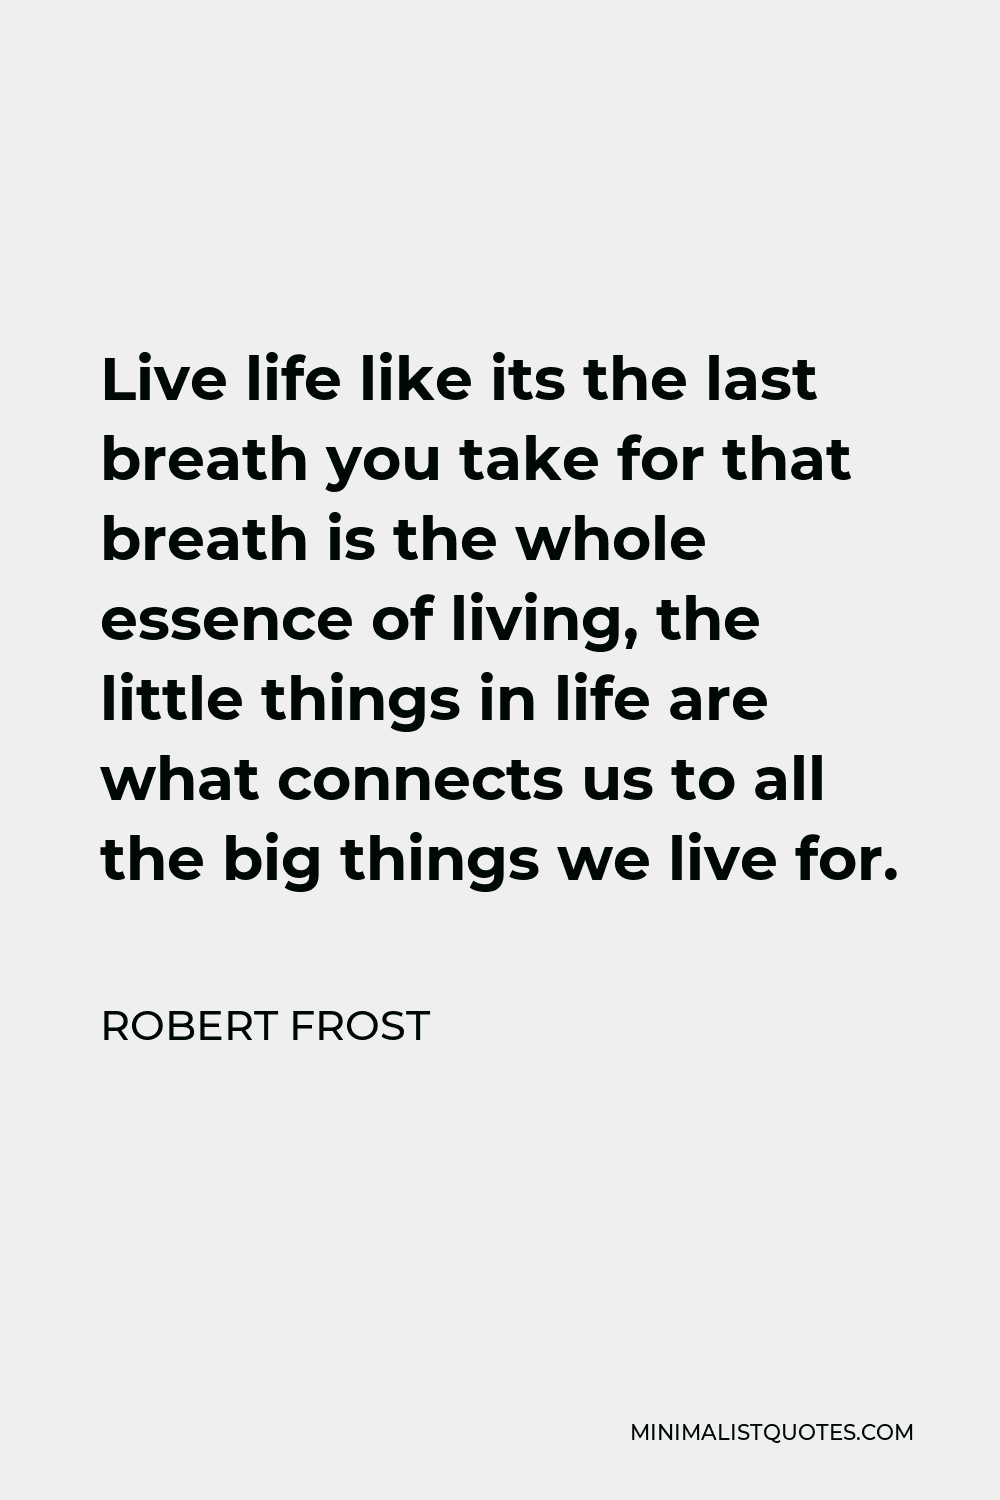 Robert Frost Quote - Live life like its the last breath you take for that breath is the whole essence of living, the little things in life are what connects us to all the big things we live for.